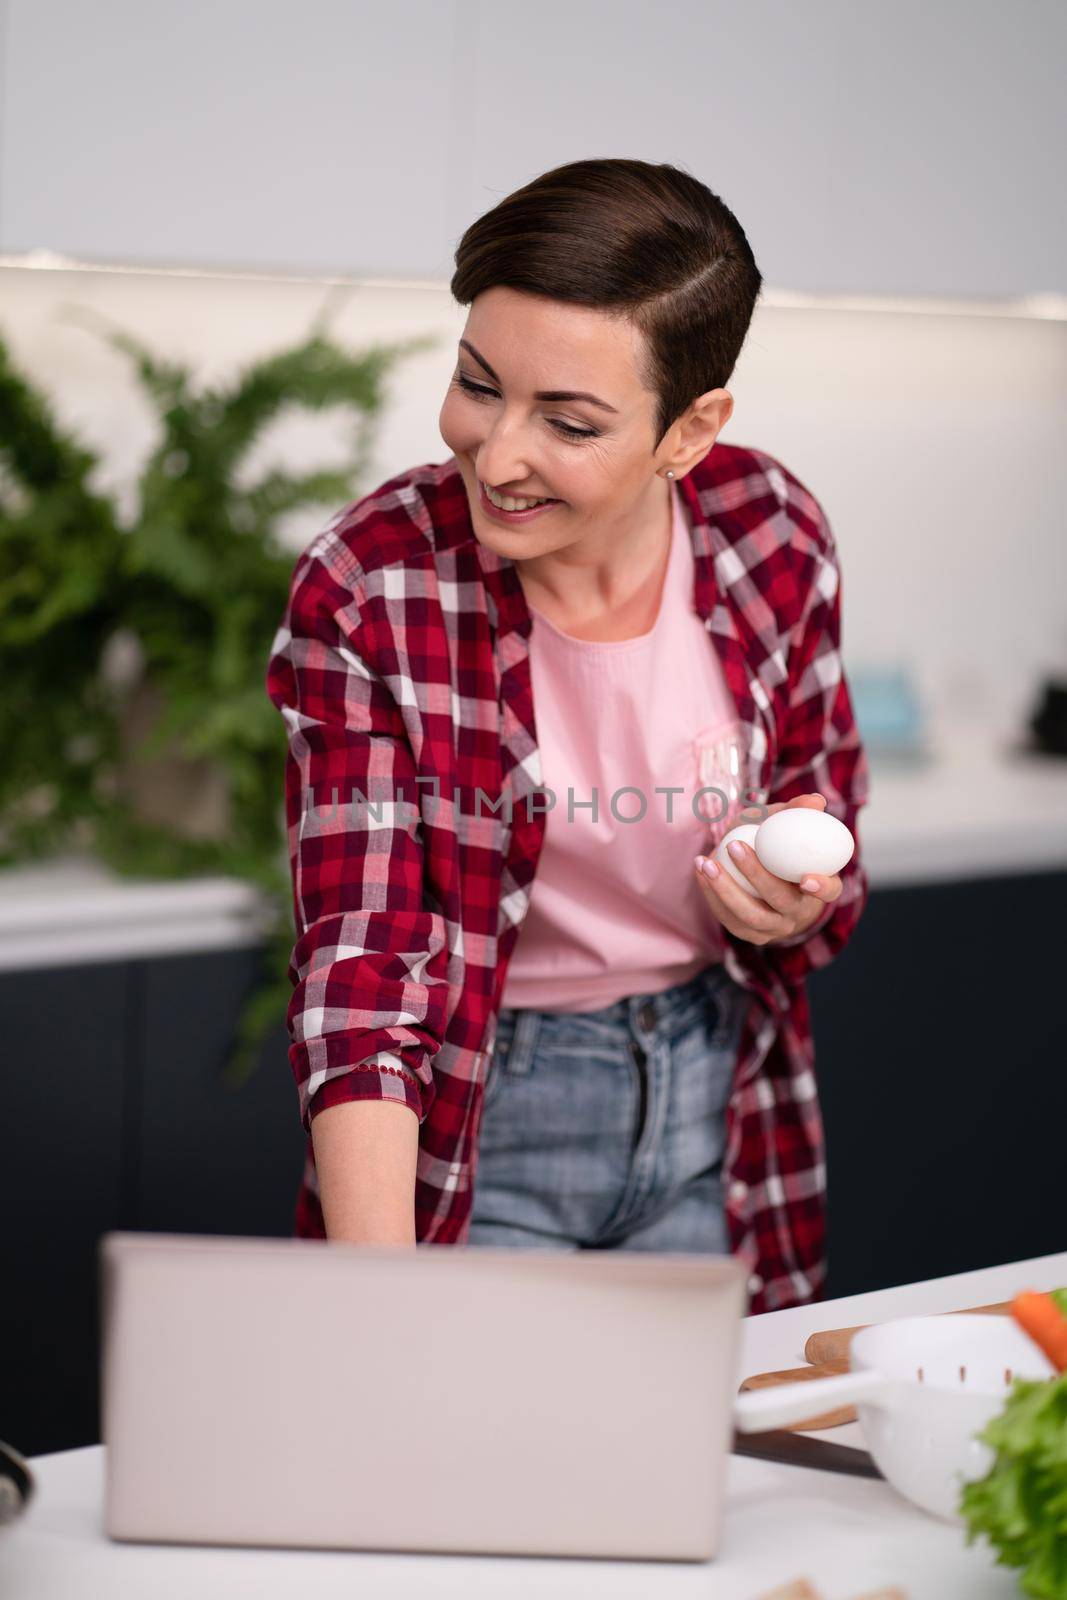 Woman in kitchen using laptop holding eggs in hand smiling while reading recipe or having a video call. Woman in red plaid shirt in modern kitchen interior.